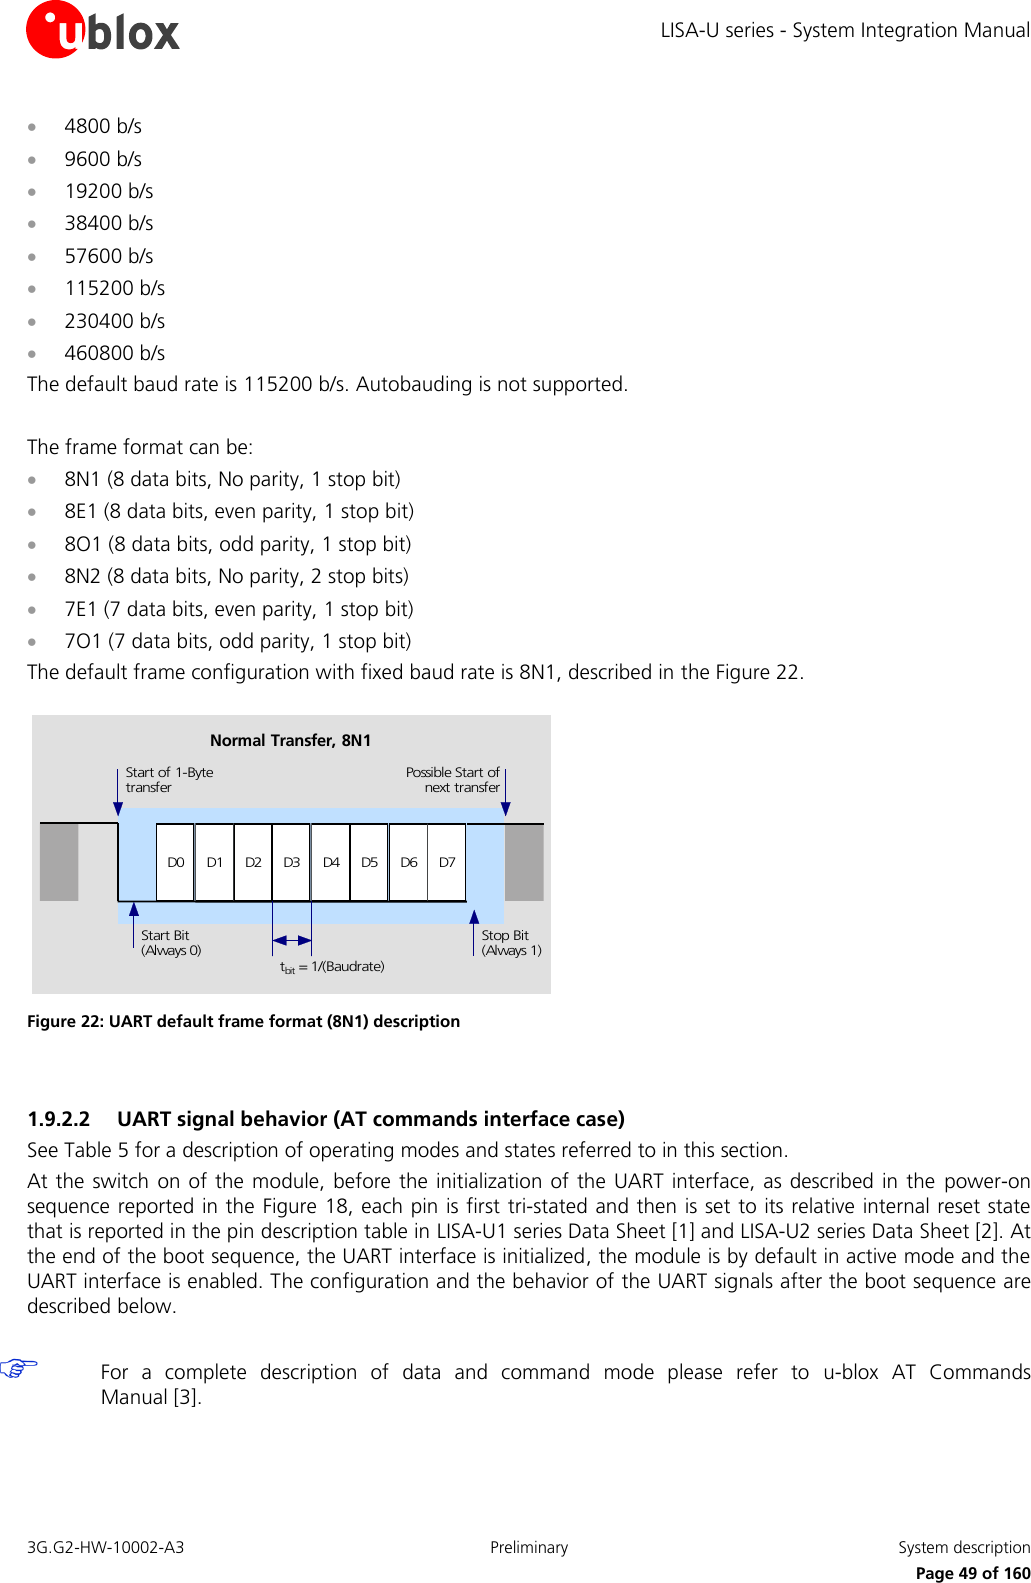 LISA-U series - System Integration Manual 3G.G2-HW-10002-A3  Preliminary  System description      Page 49 of 160  4800 b/s  9600 b/s  19200 b/s  38400 b/s  57600 b/s  115200 b/s  230400 b/s  460800 b/s The default baud rate is 115200 b/s. Autobauding is not supported.  The frame format can be:  8N1 (8 data bits, No parity, 1 stop bit)  8E1 (8 data bits, even parity, 1 stop bit)  8O1 (8 data bits, odd parity, 1 stop bit)  8N2 (8 data bits, No parity, 2 stop bits)  7E1 (7 data bits, even parity, 1 stop bit)  7O1 (7 data bits, odd parity, 1 stop bit) The default frame configuration with fixed baud rate is 8N1, described in the Figure 22. D0 D1 D2 D3 D4 D5 D6 D7Start of 1-BytetransferStart Bit(Always 0)Possible Start ofnext transferStop Bit(Always 1)tbit = 1/(Baudrate)Normal Transfer, 8N1 Figure 22: UART default frame format (8N1) description  1.9.2.2 UART signal behavior (AT commands interface case) See Table 5 for a description of operating modes and states referred to in this section. At the switch on of the  module, before the initialization of the  UART interface, as described in the  power-on sequence reported in the Figure 18, each pin is first tri-stated and then is set to its relative internal reset state that is reported in the pin description table in LISA-U1 series Data Sheet [1] and LISA-U2 series Data Sheet [2]. At the end of the boot sequence, the UART interface is initialized, the module is by default in active mode and the UART interface is enabled. The configuration and the behavior of the UART signals after the boot sequence are described below.   For  a  complete  description  of  data  and  command  mode  please  refer  to  u-blox  AT  Commands Manual [3].  